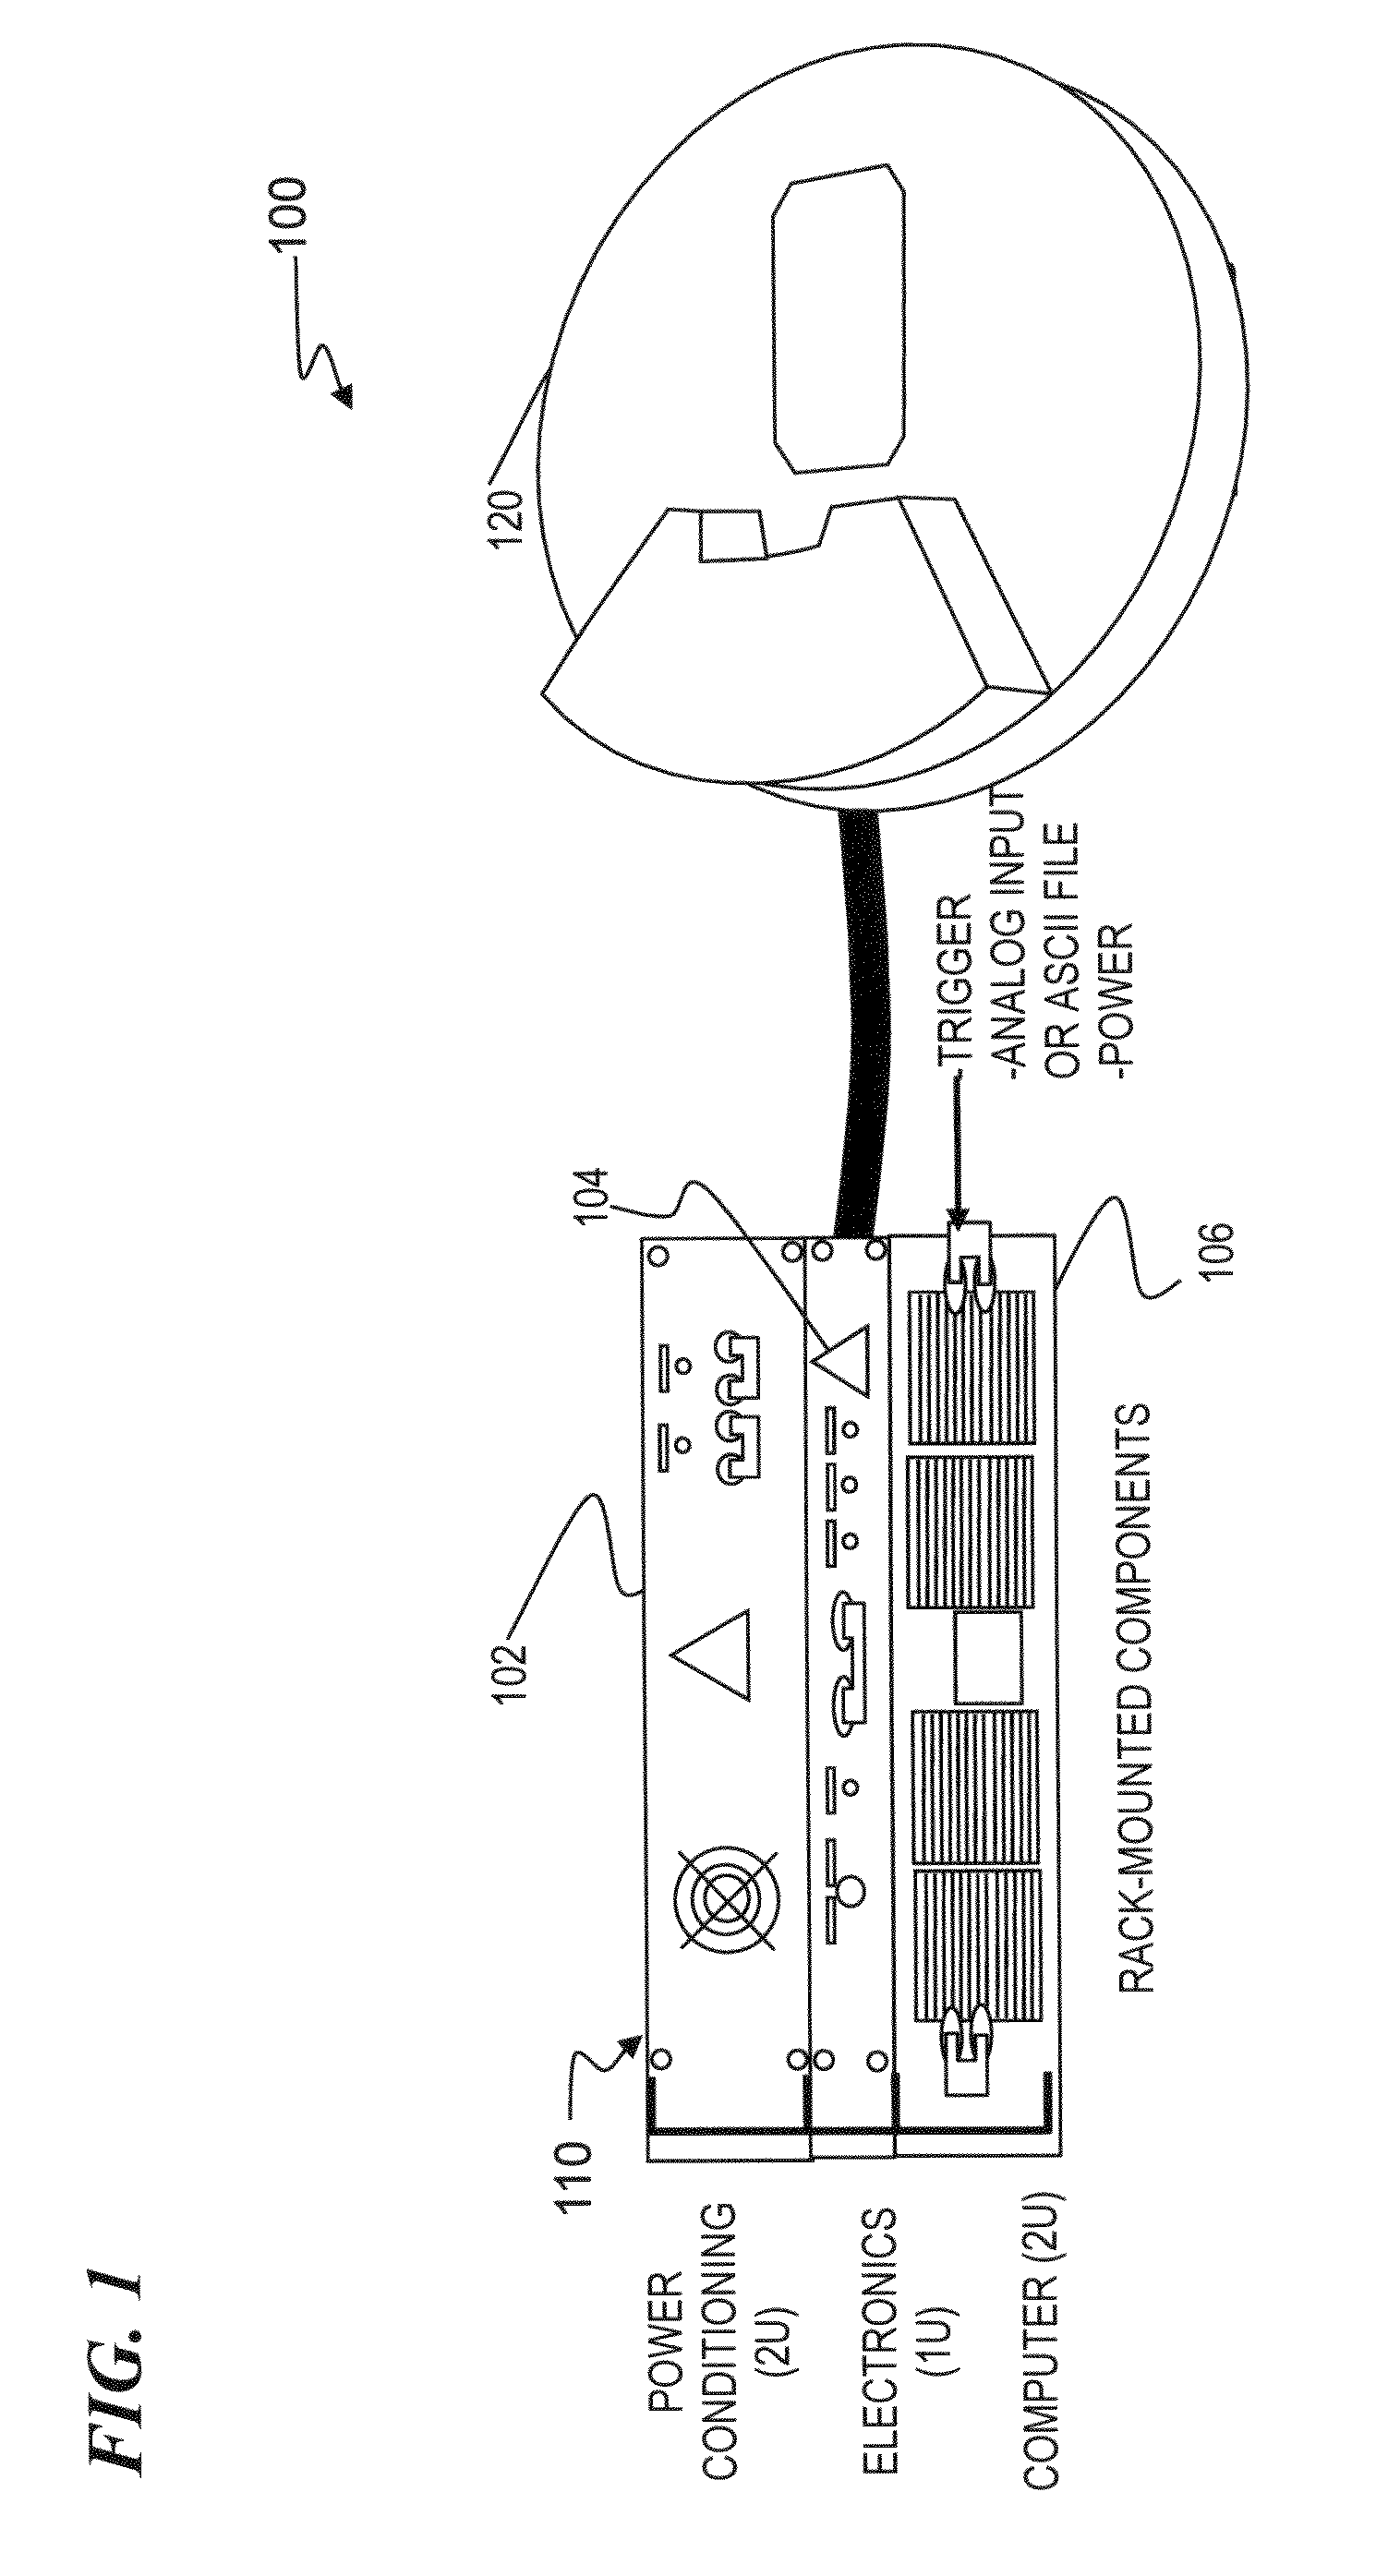 Missile system using two-color missile-signature simulation using mid-infrared test source semiconductor lasers